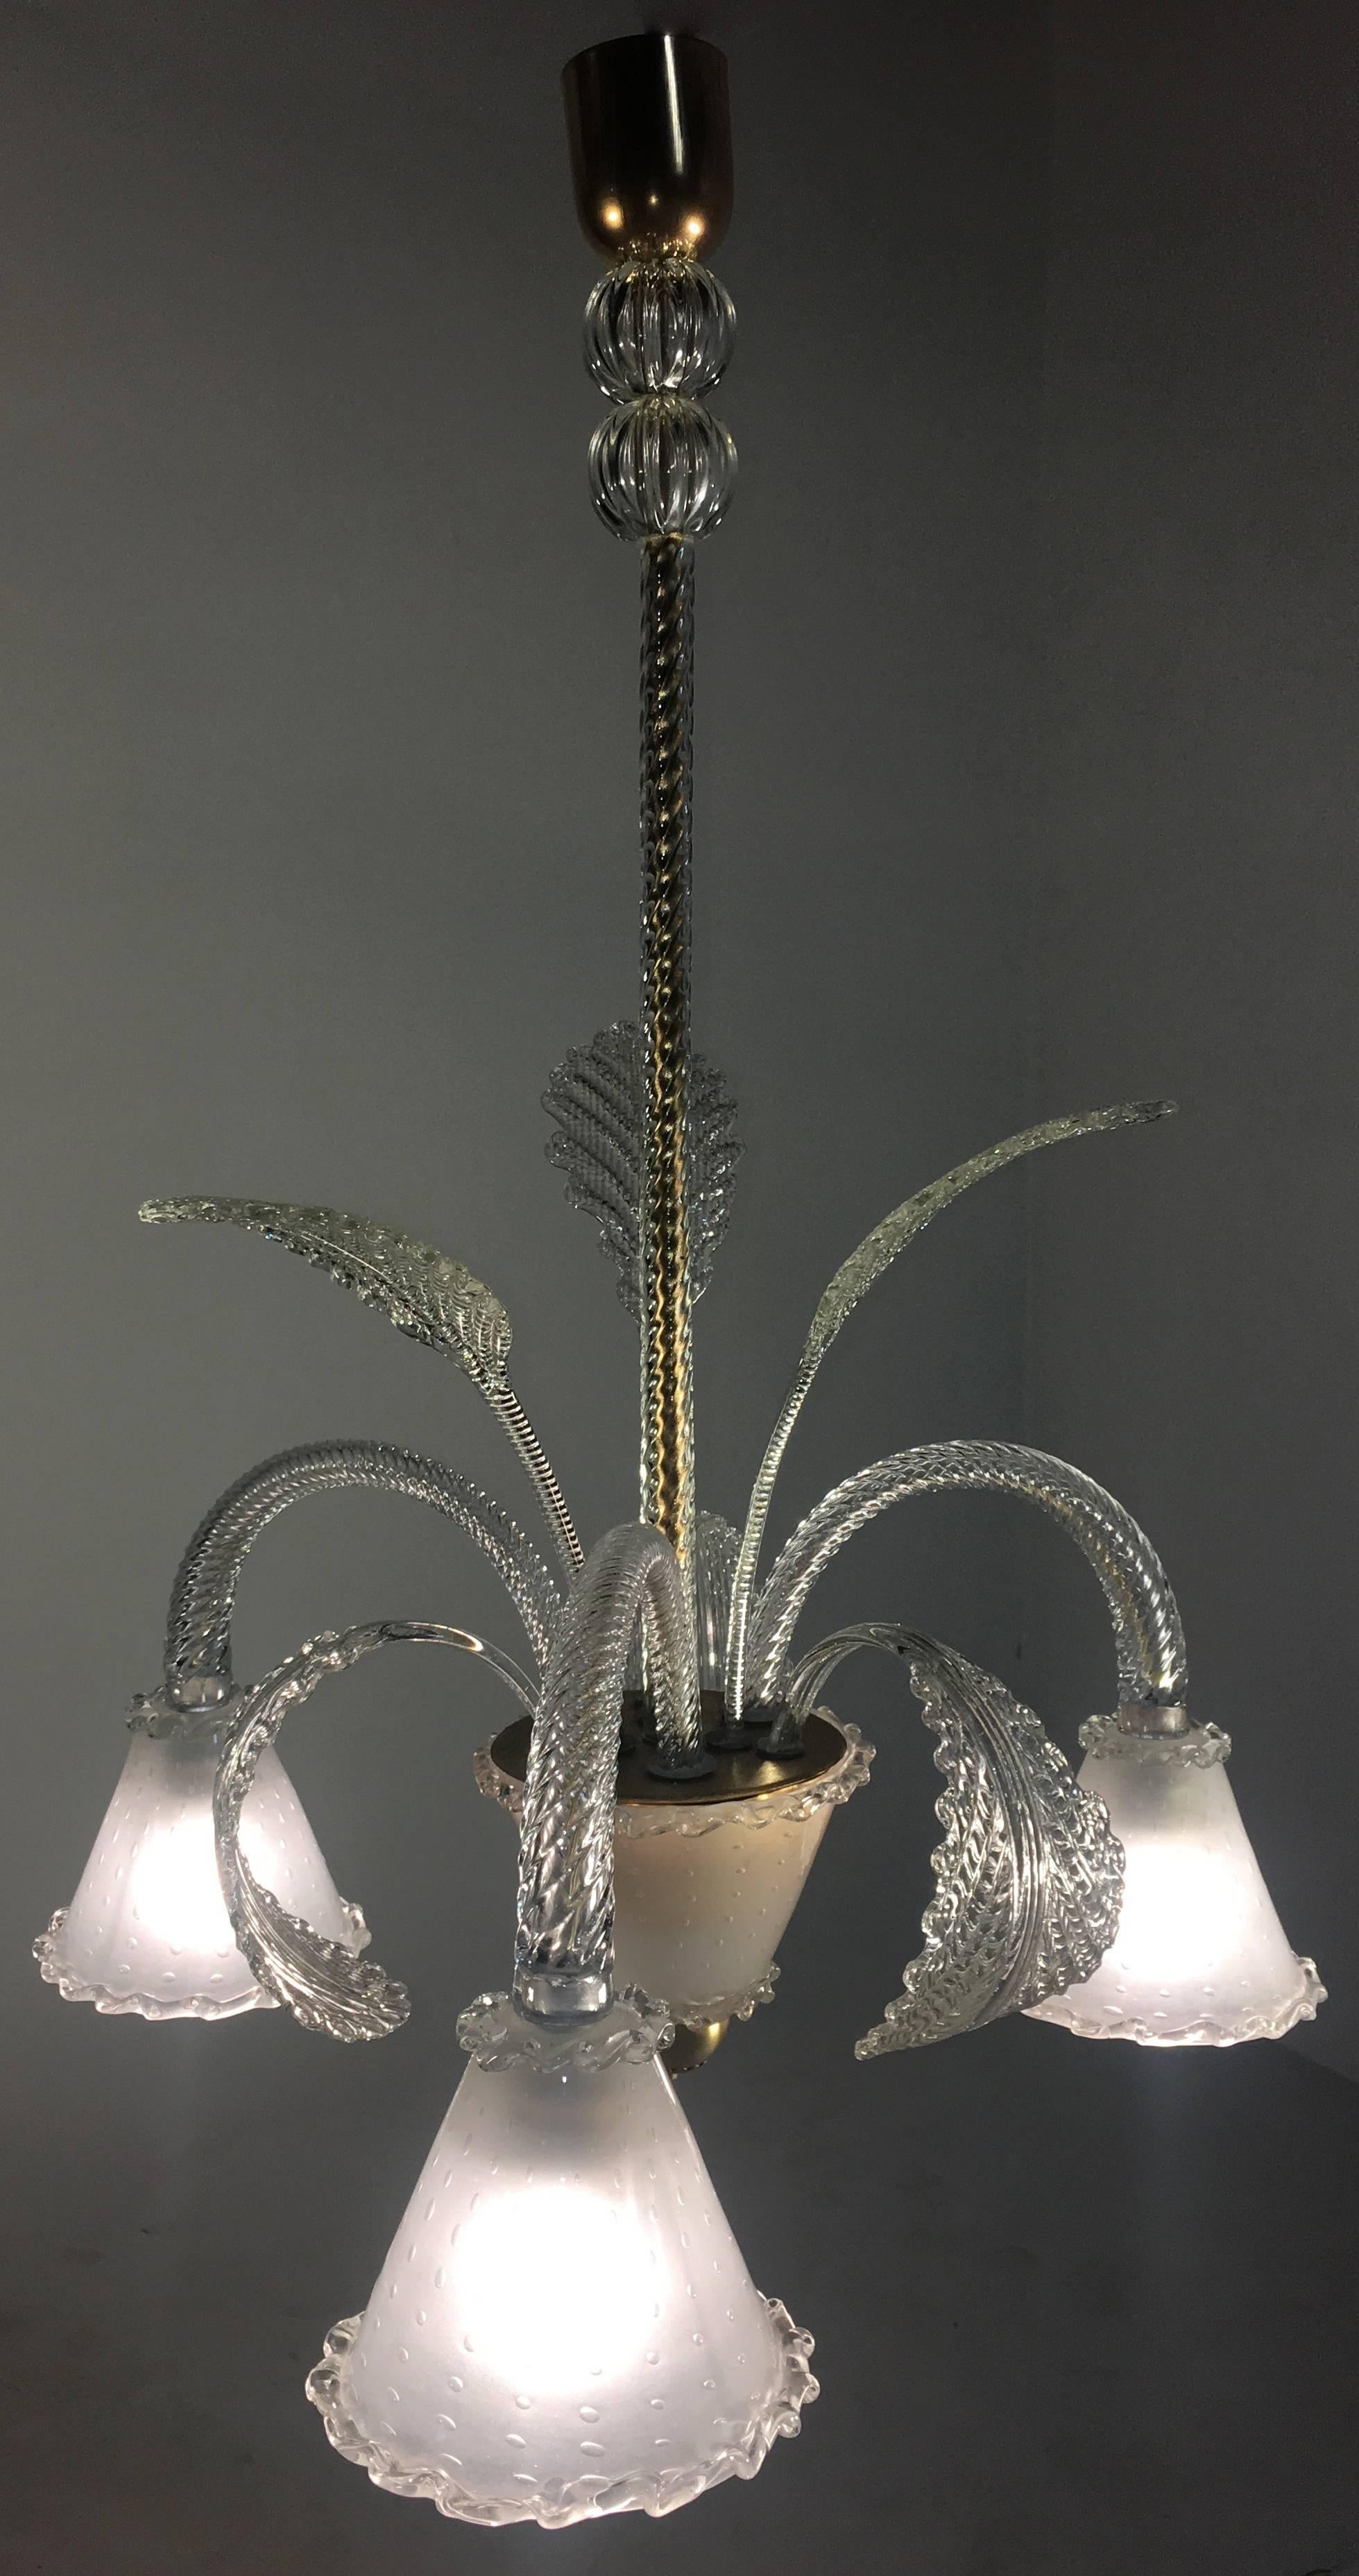 Elegant Barovier e Toso chandelier in handblown 'Bullicante' Murano glass and polished brass, circa 1940. Piece of incredible beauty. From Private collection Von Plant Baron.